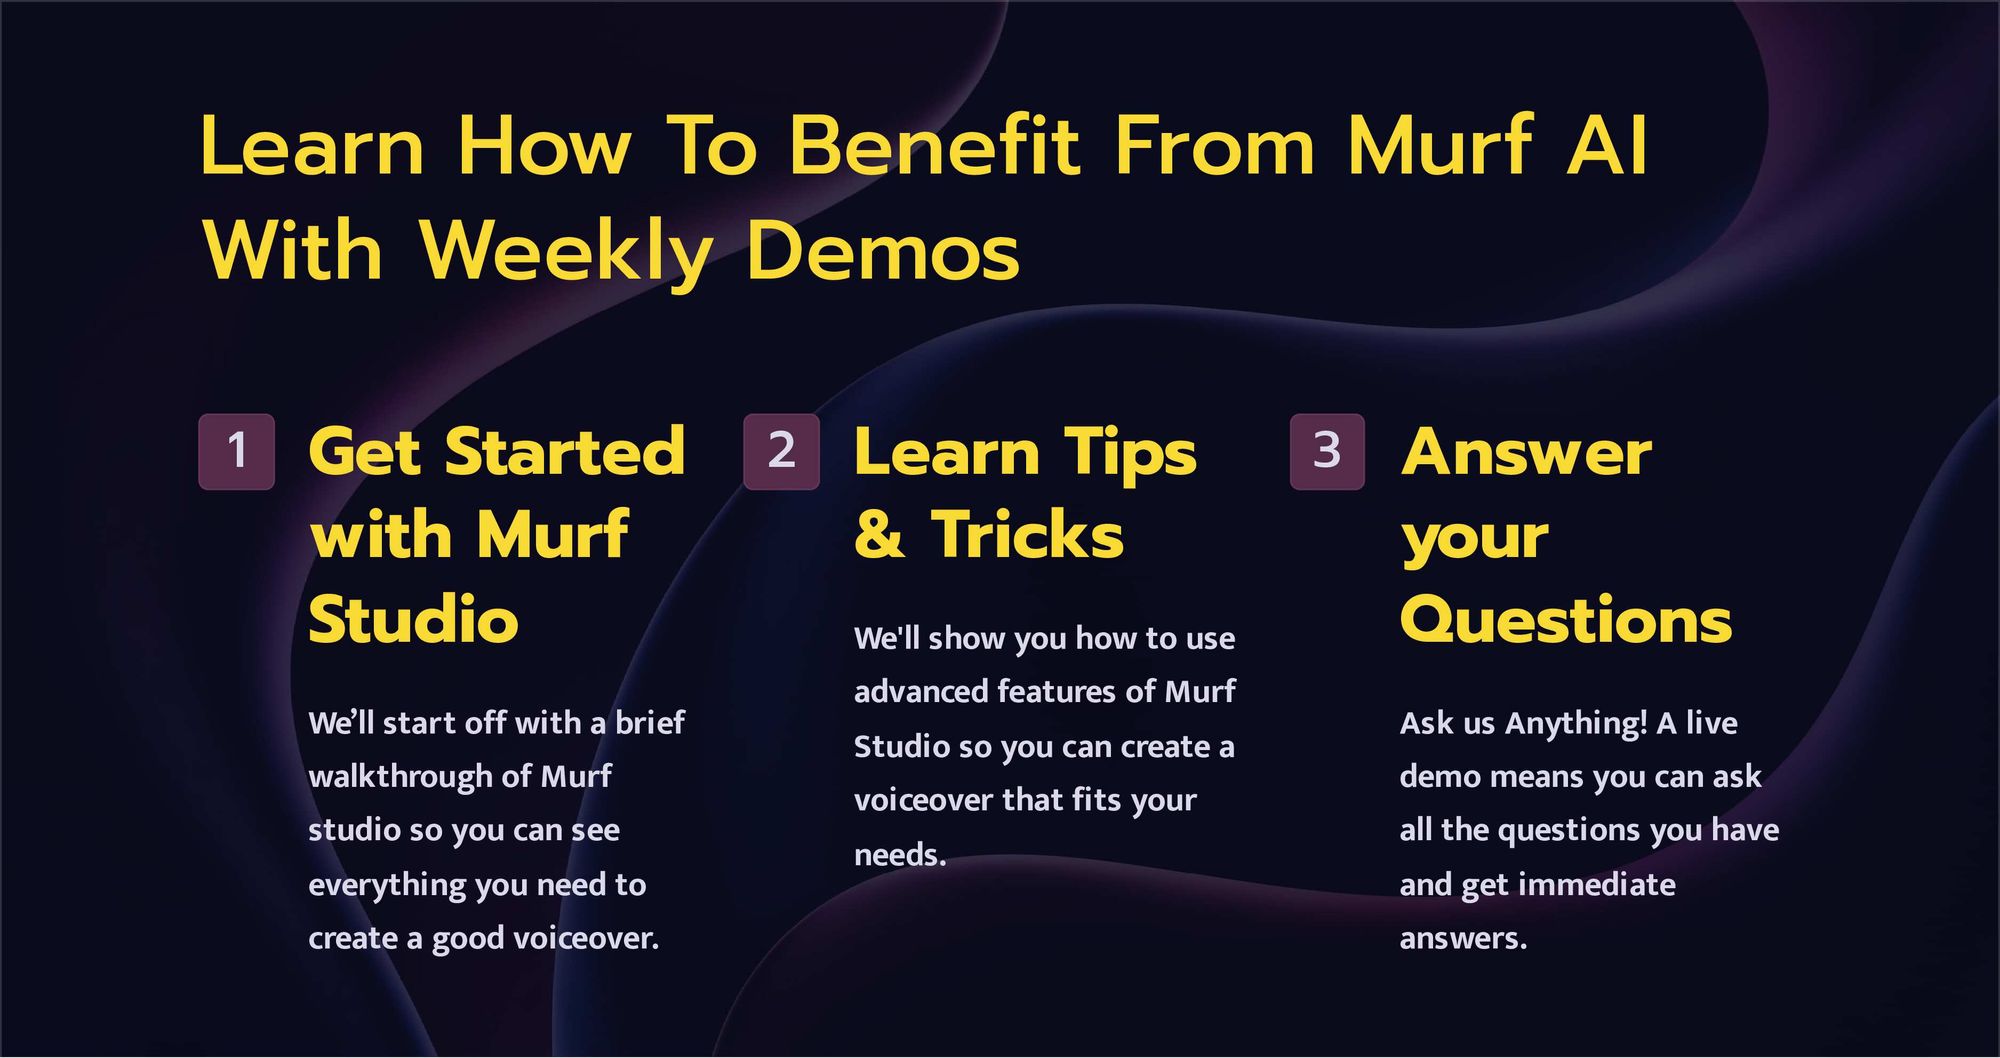 Learn hot to benefit from murf ai with weekly demos